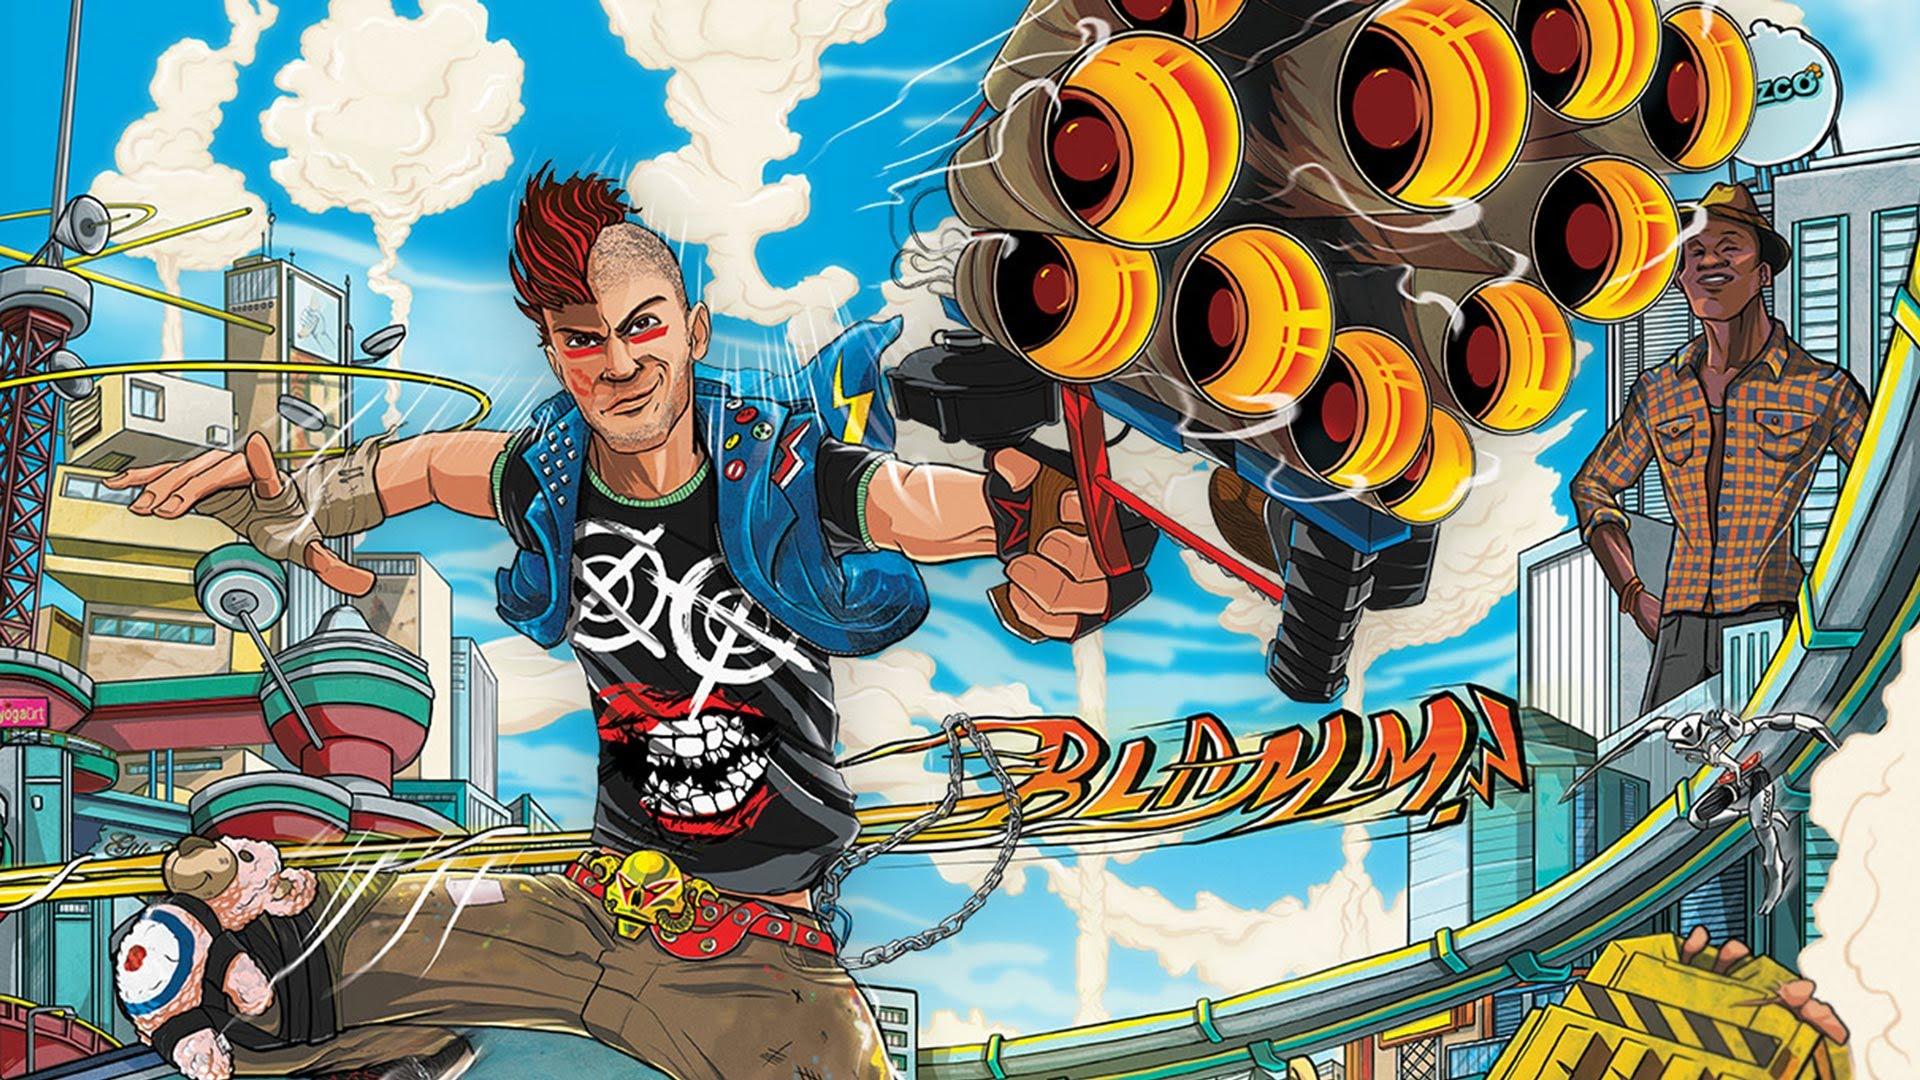 Xbox Games With Gold de abril inclui Sunset Overdrive e The Wolf Among Us